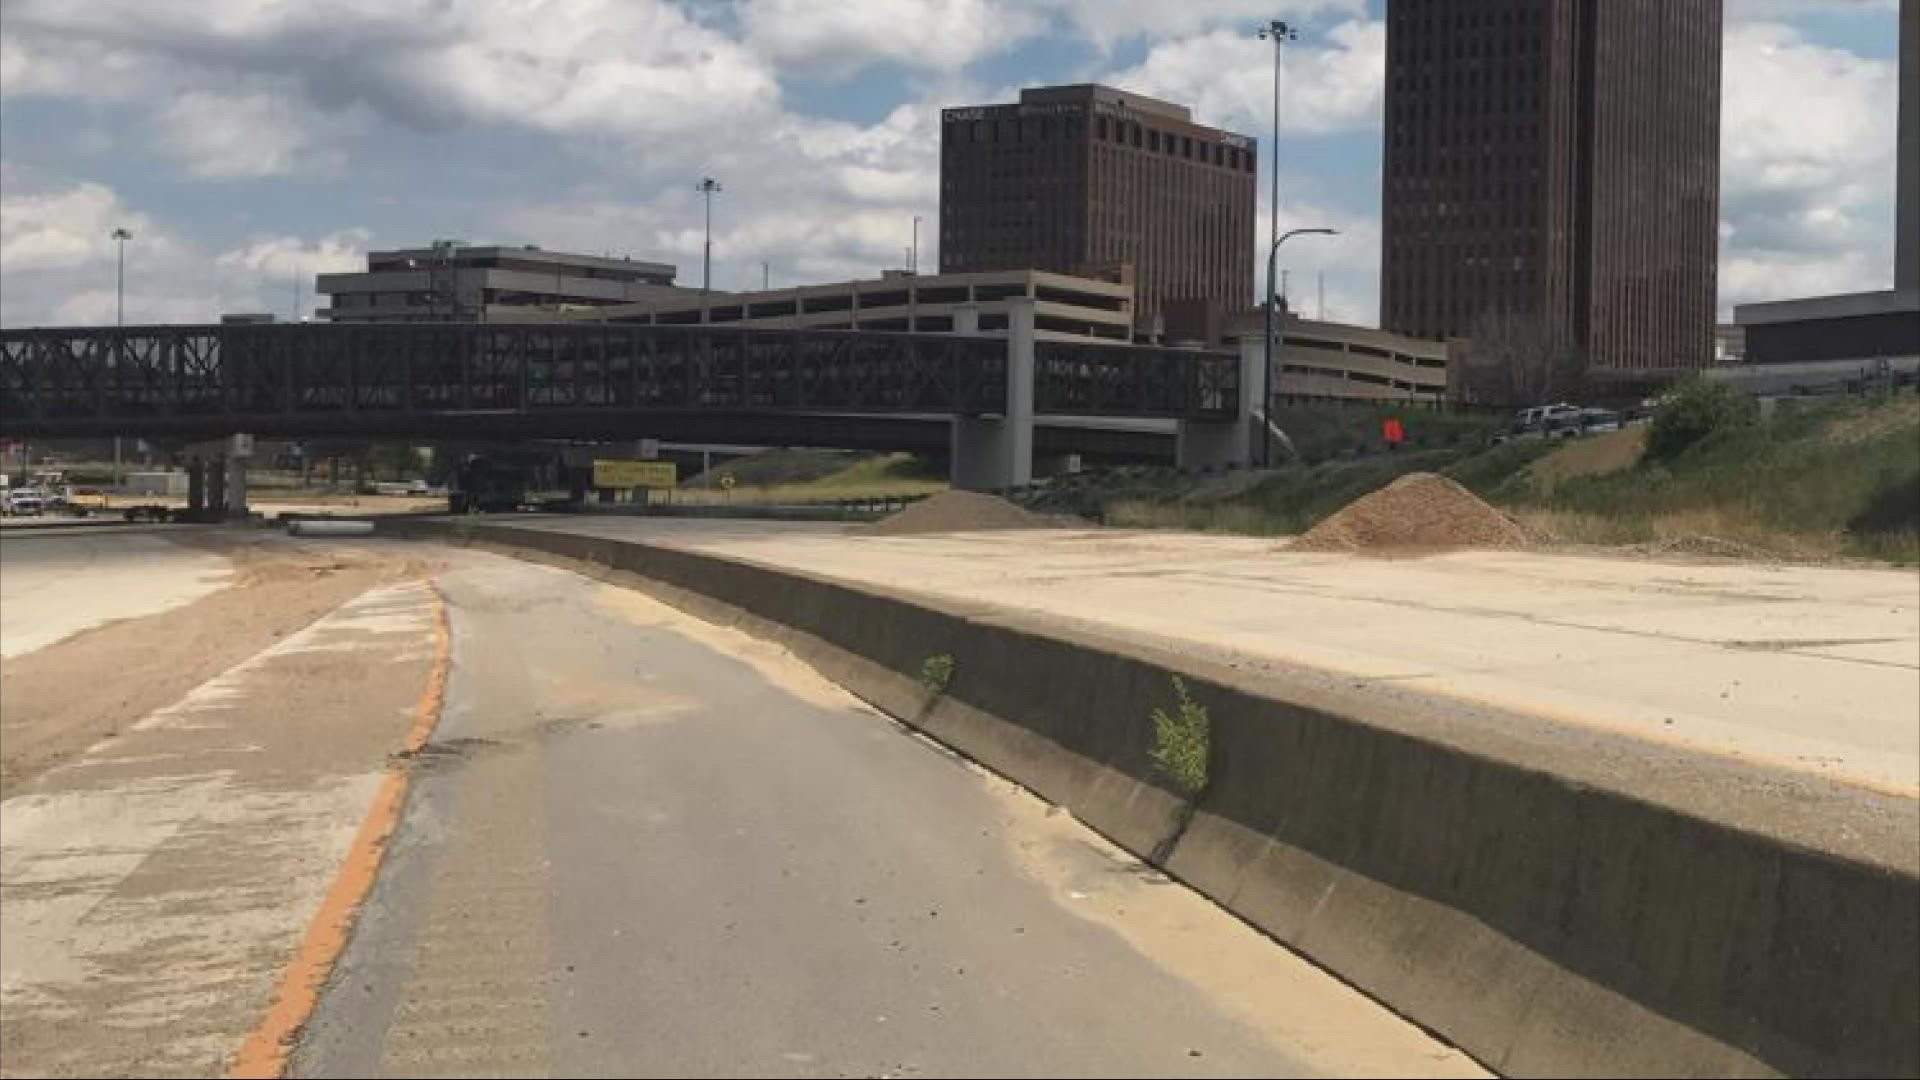 The city has launched a survey regarding the future of the Innerbelt that asks for feedback on what you think Akron needs.